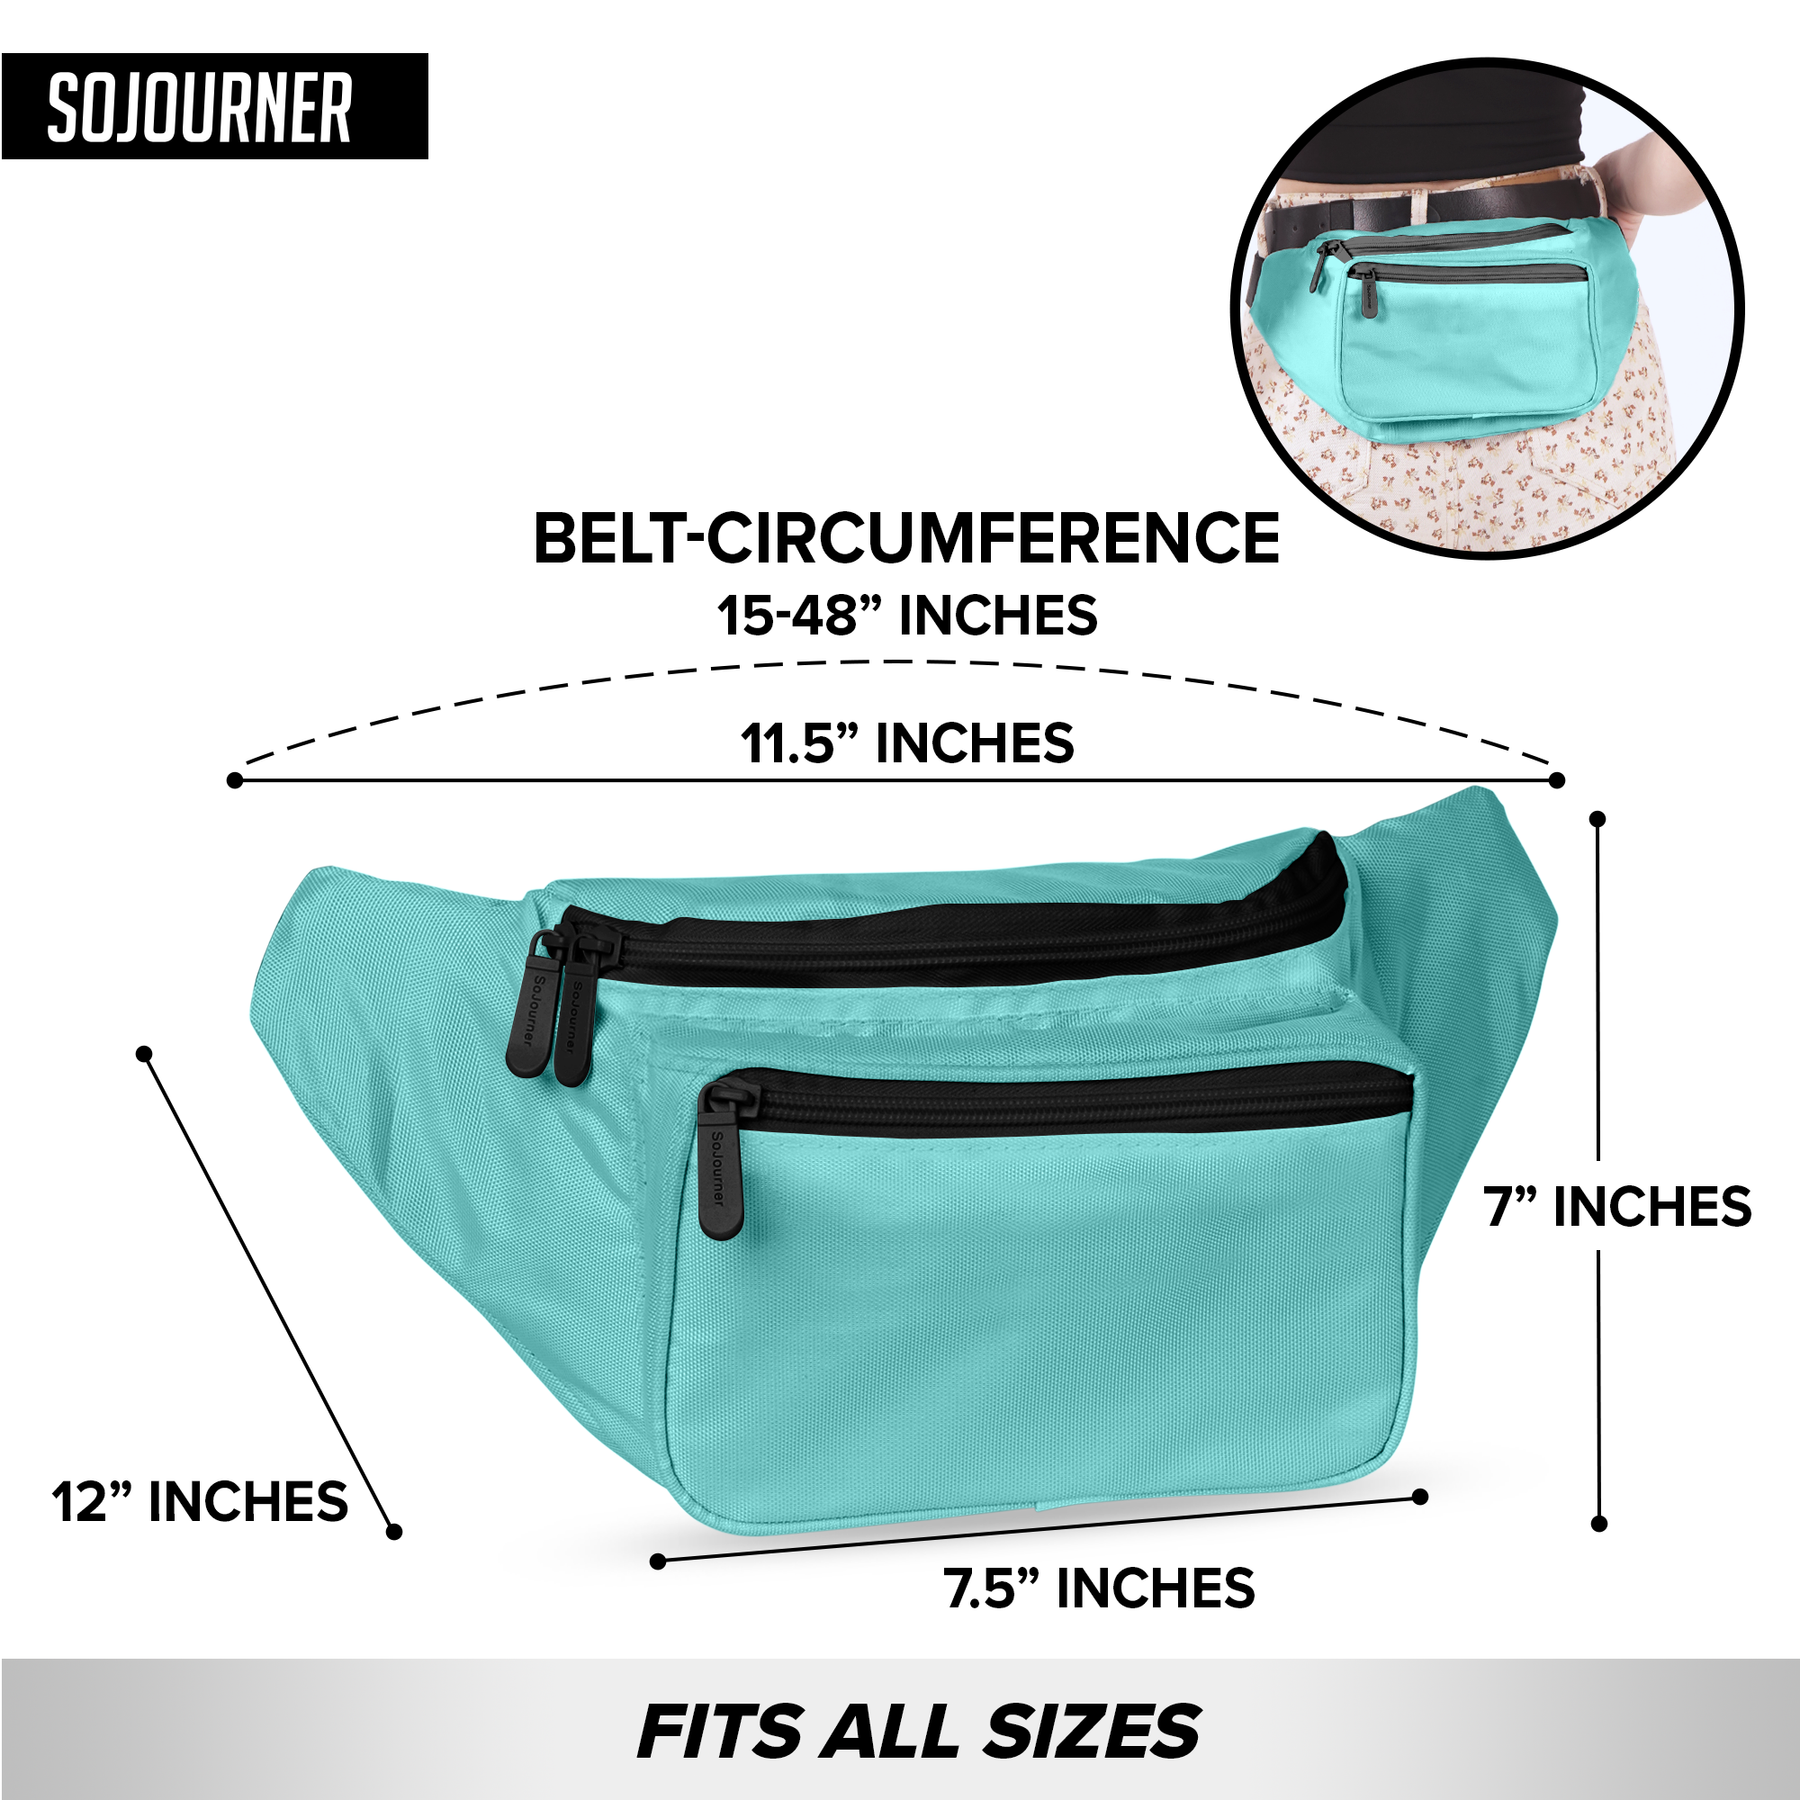 Daily Small Fanny Pack - Turquoise